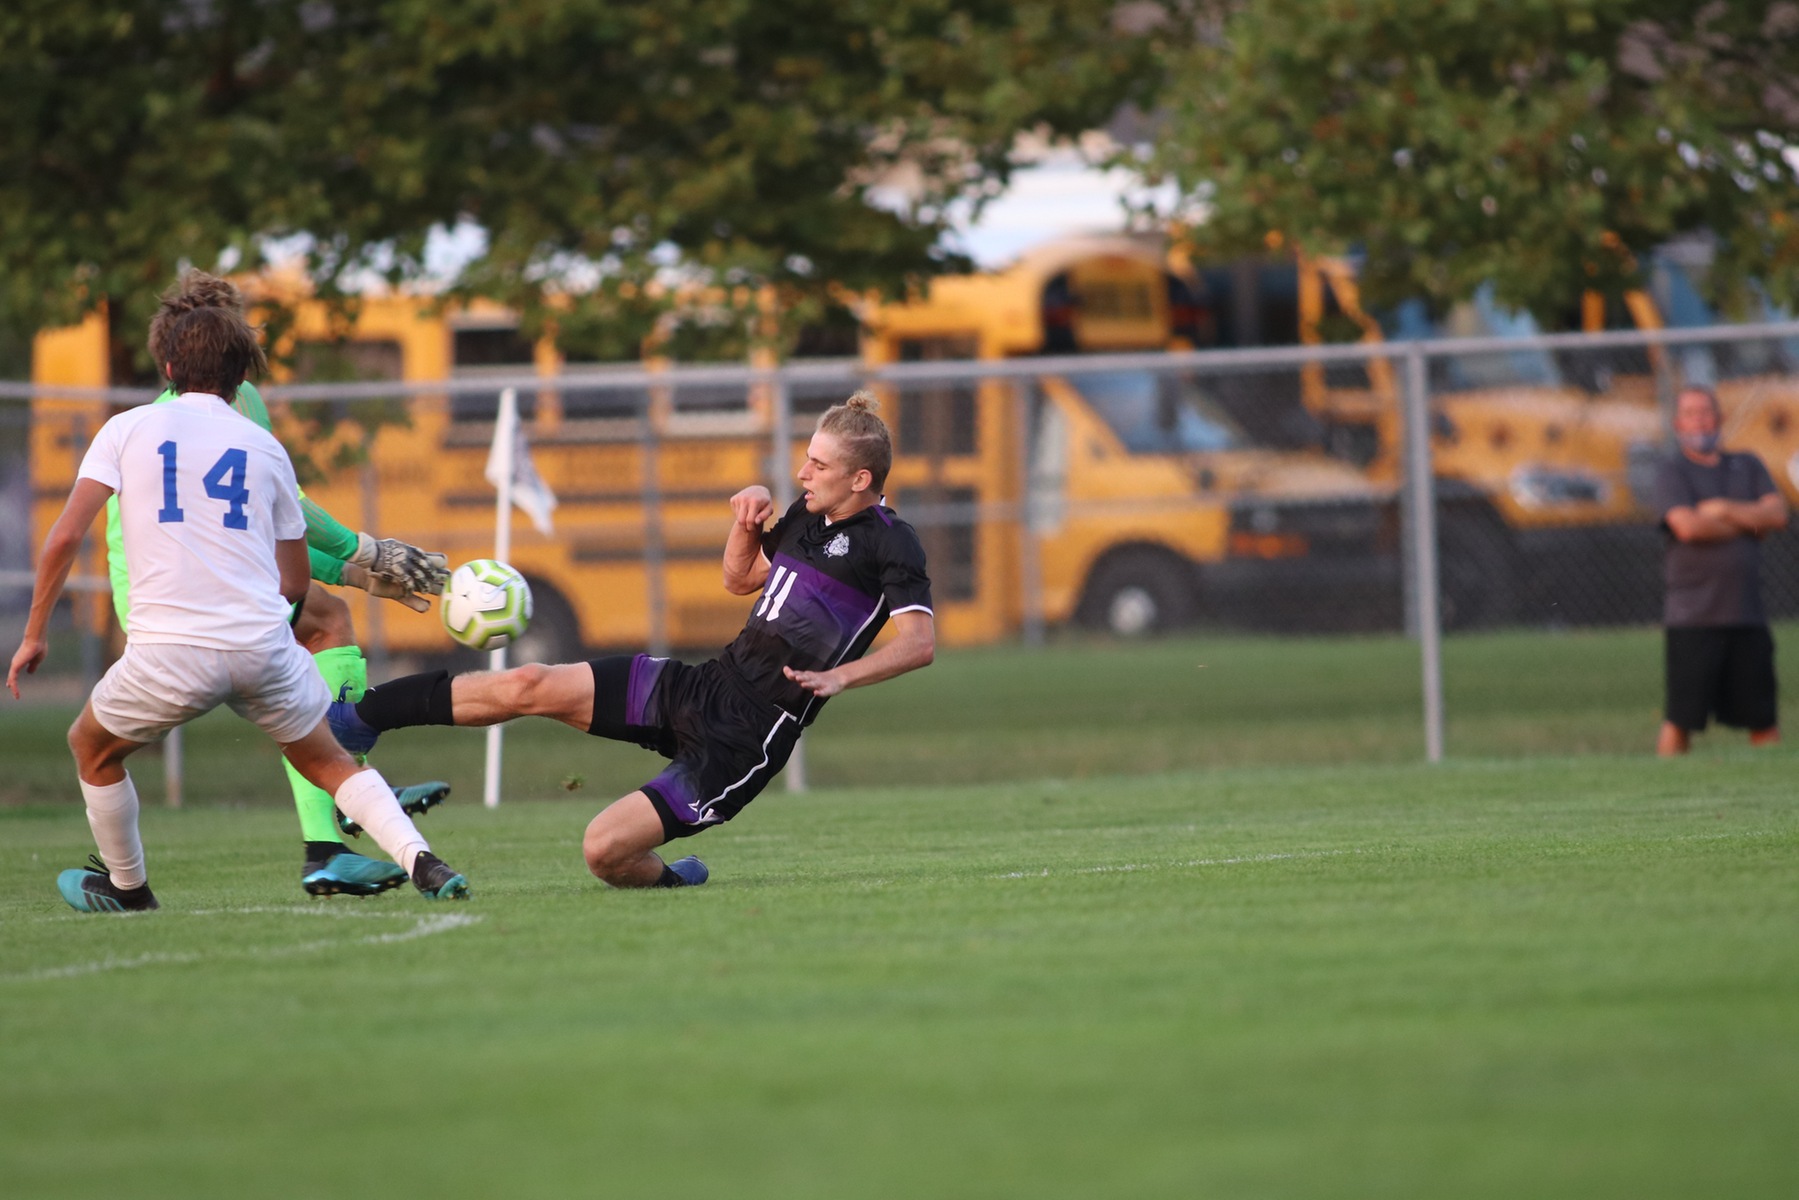 Boys' Soccer plays to 2-2 draw with Guerin Catholic